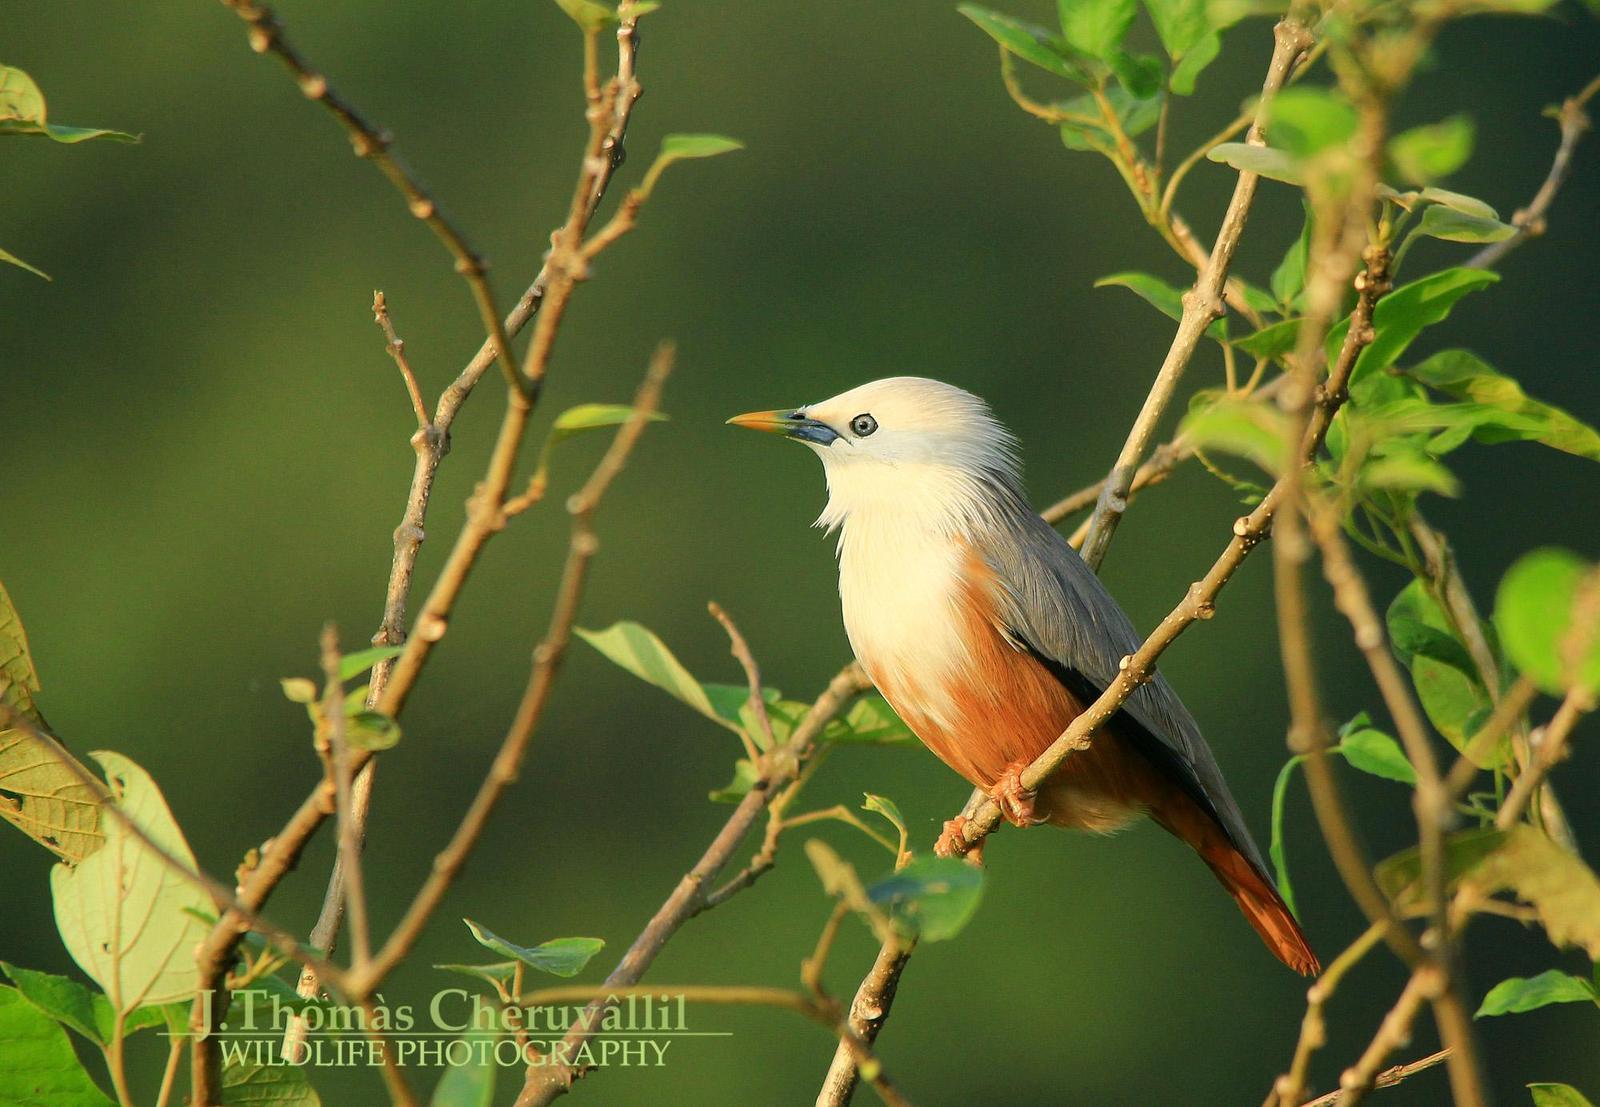 Chestnut-tailed Starling Photo by Jinu Thomas 